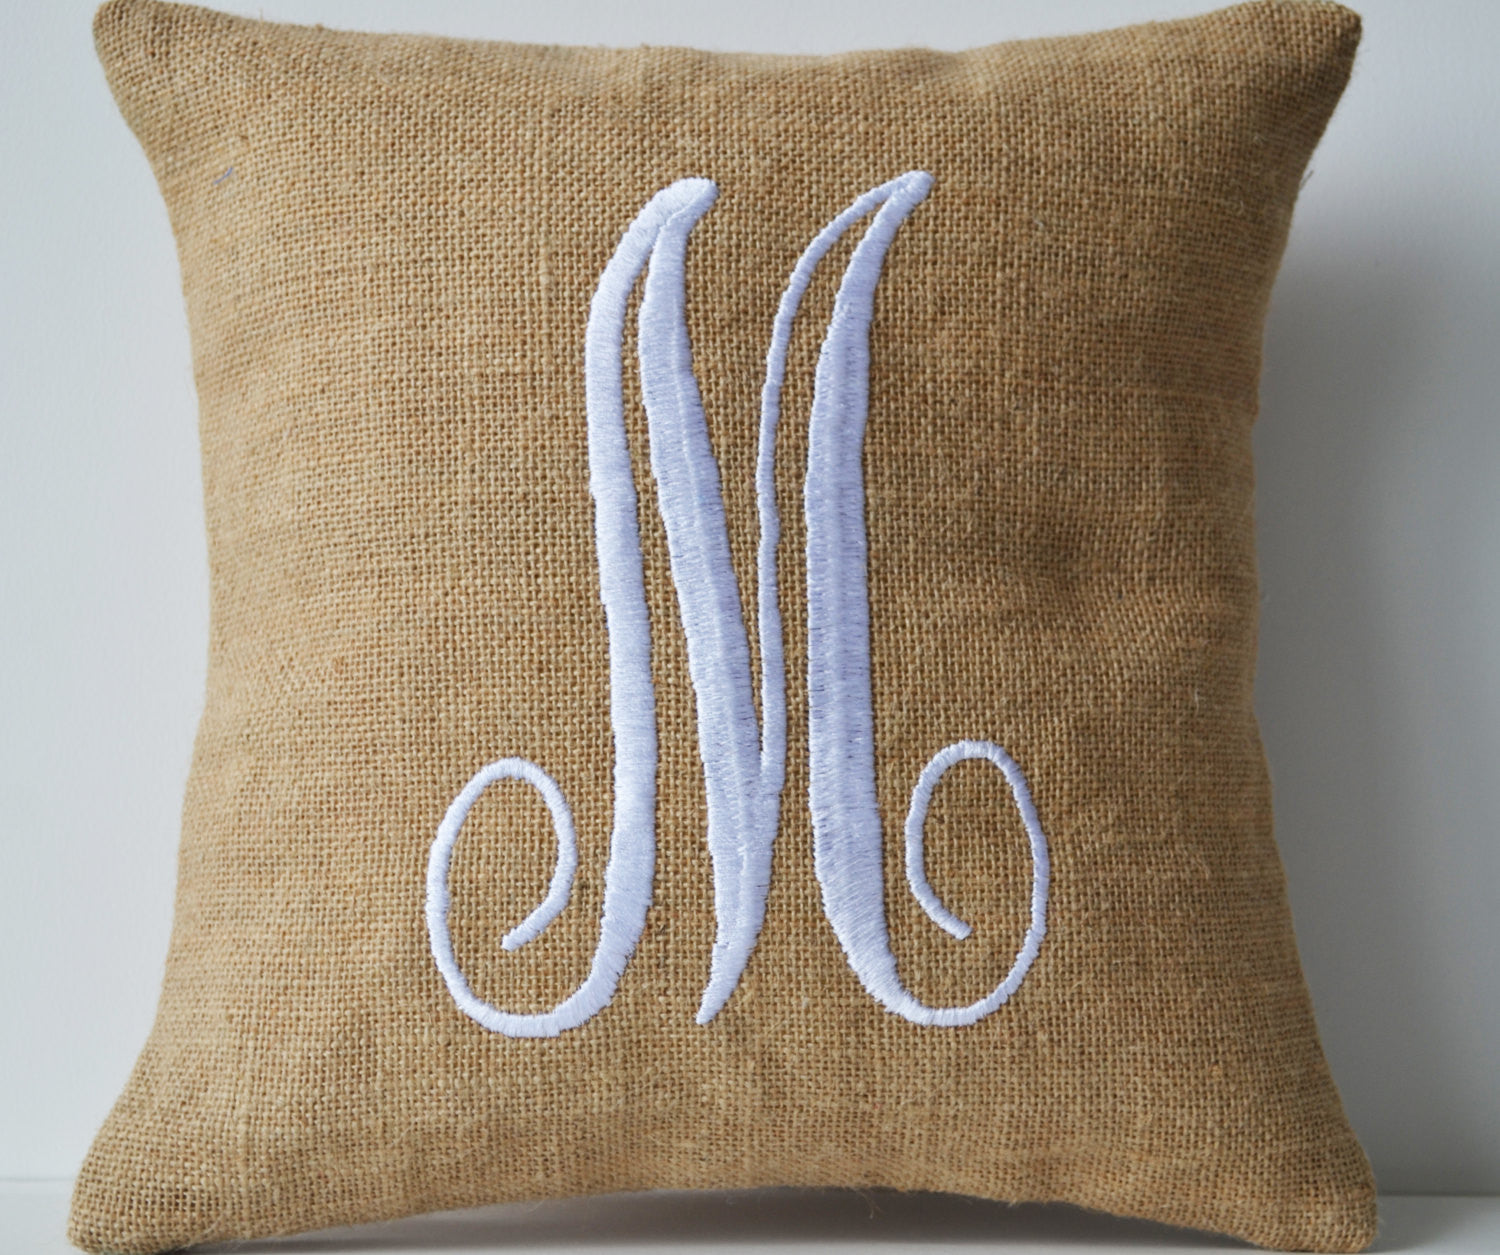 Shop online for burlap pillow with monogram and white embroidery – Amore  Beauté